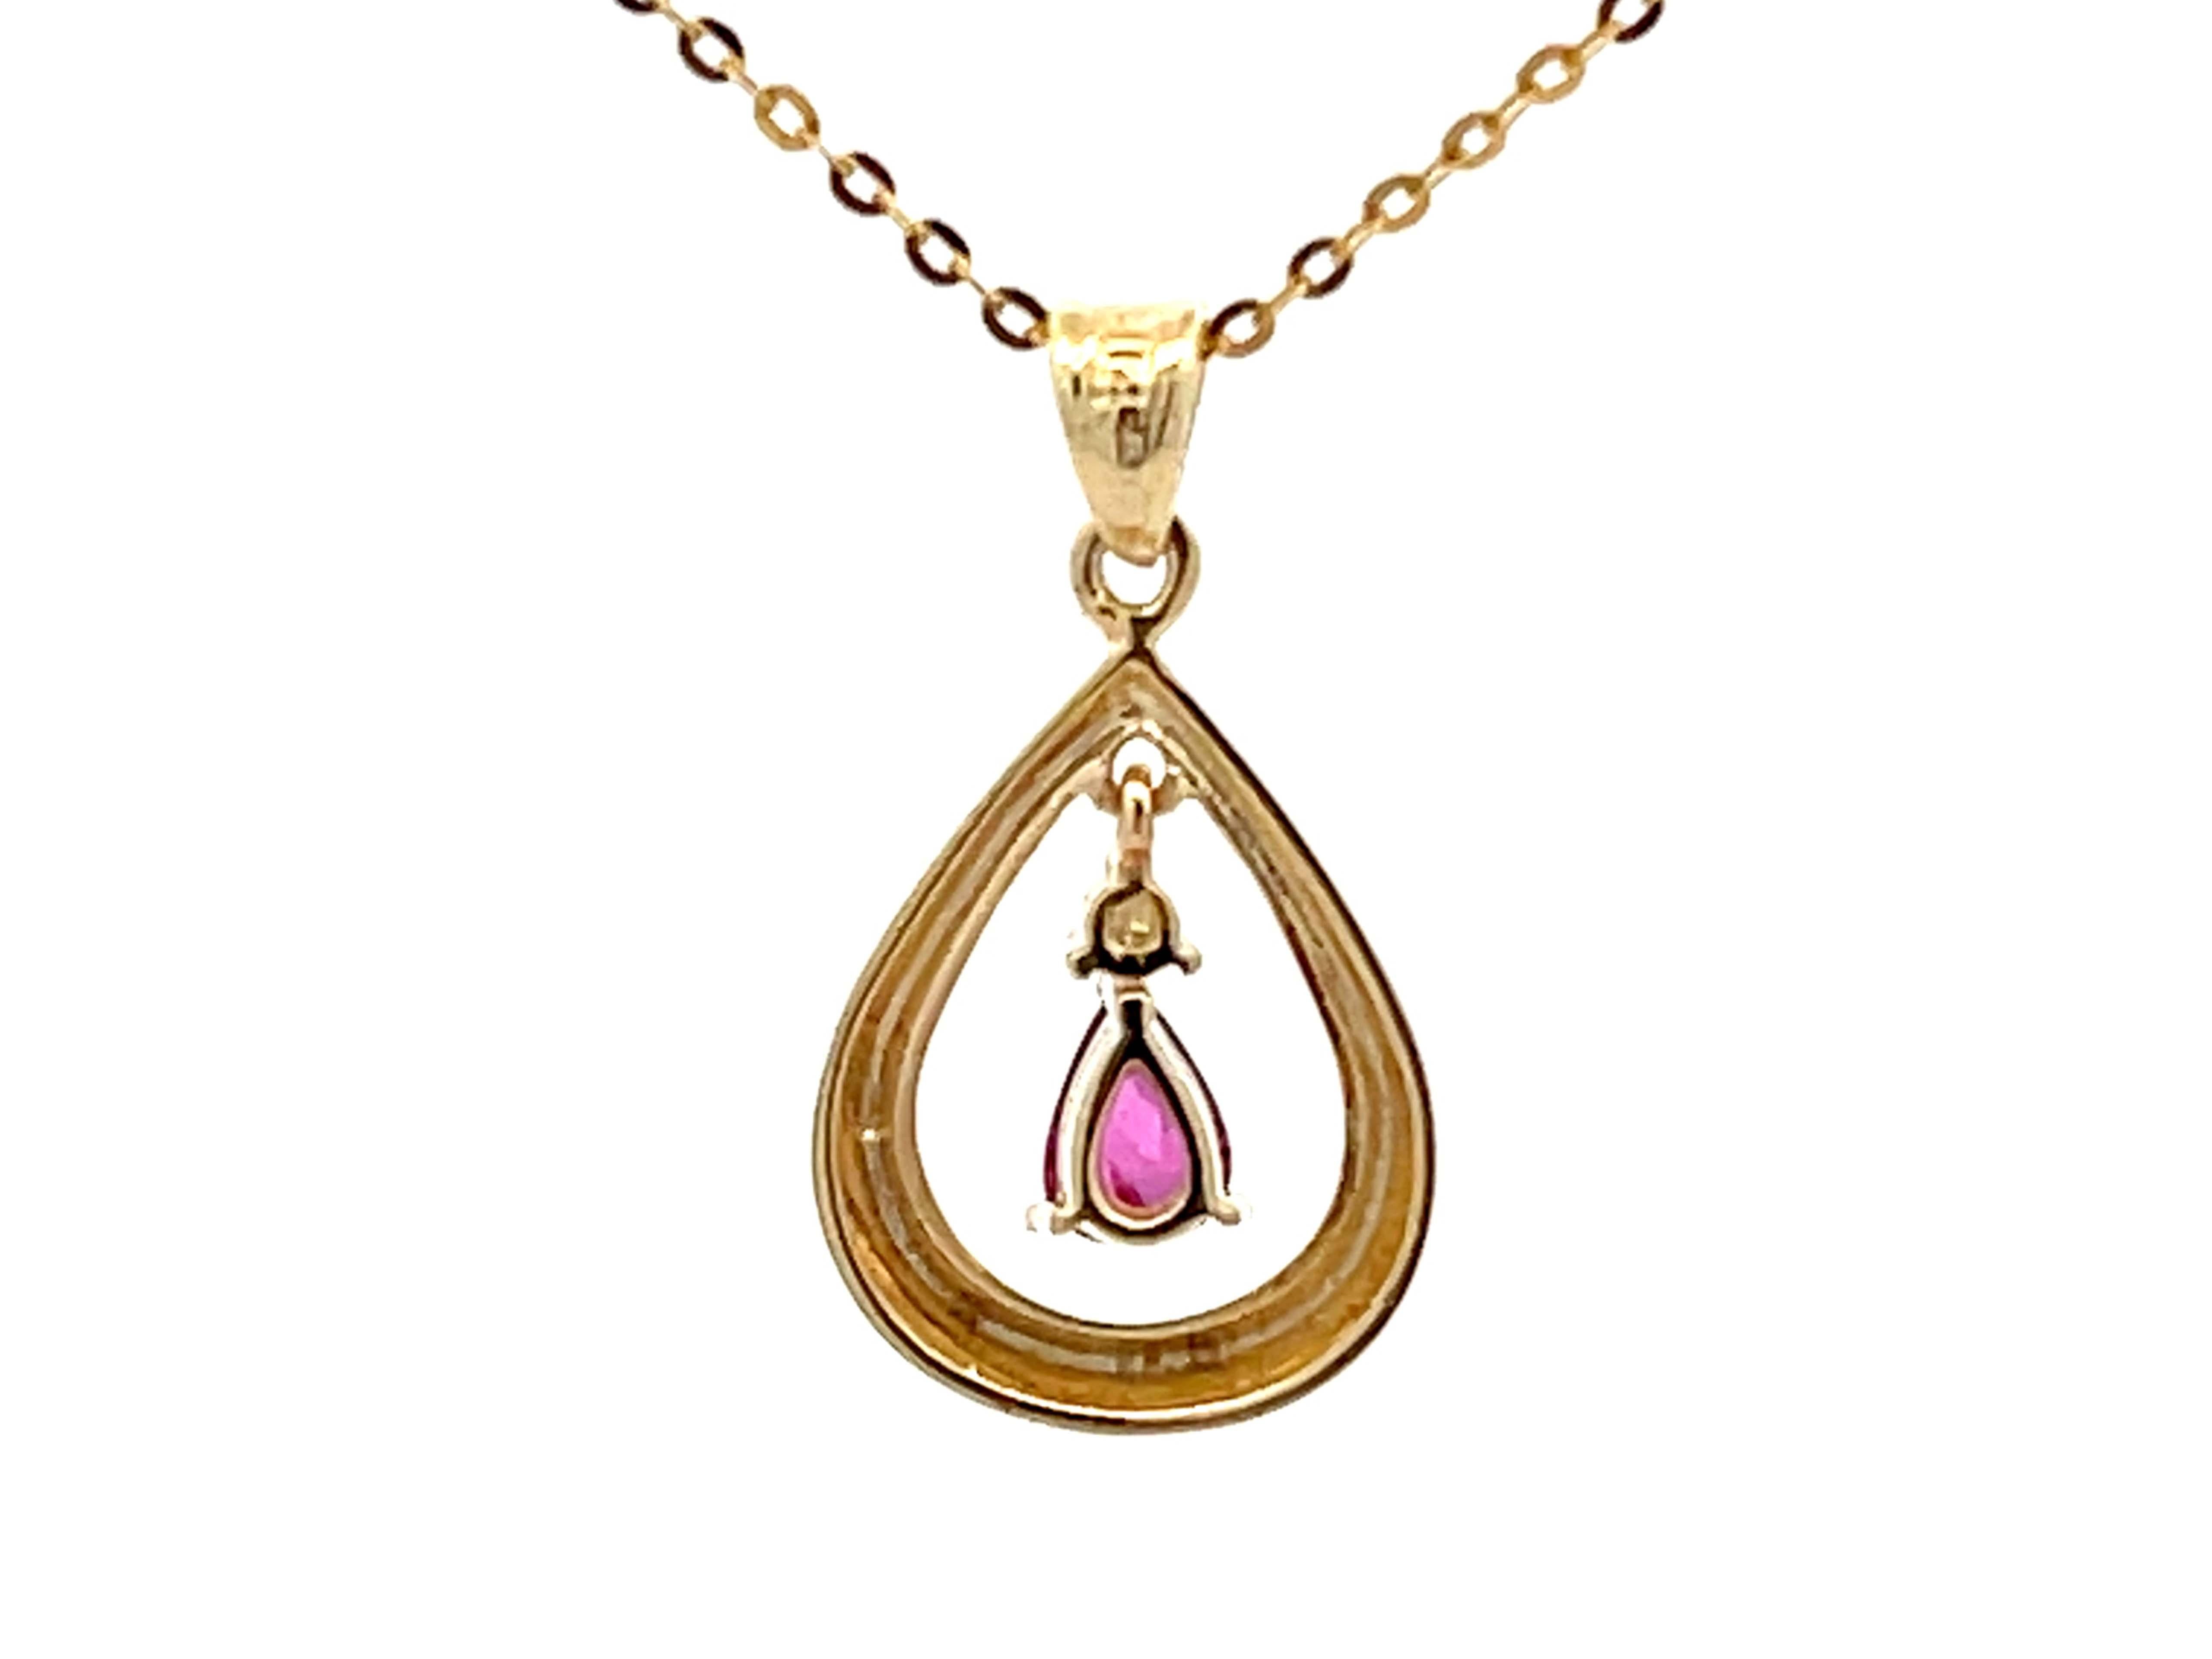 Dangly Burma Ruby Necklace 14k Yellow Gold For Sale 1